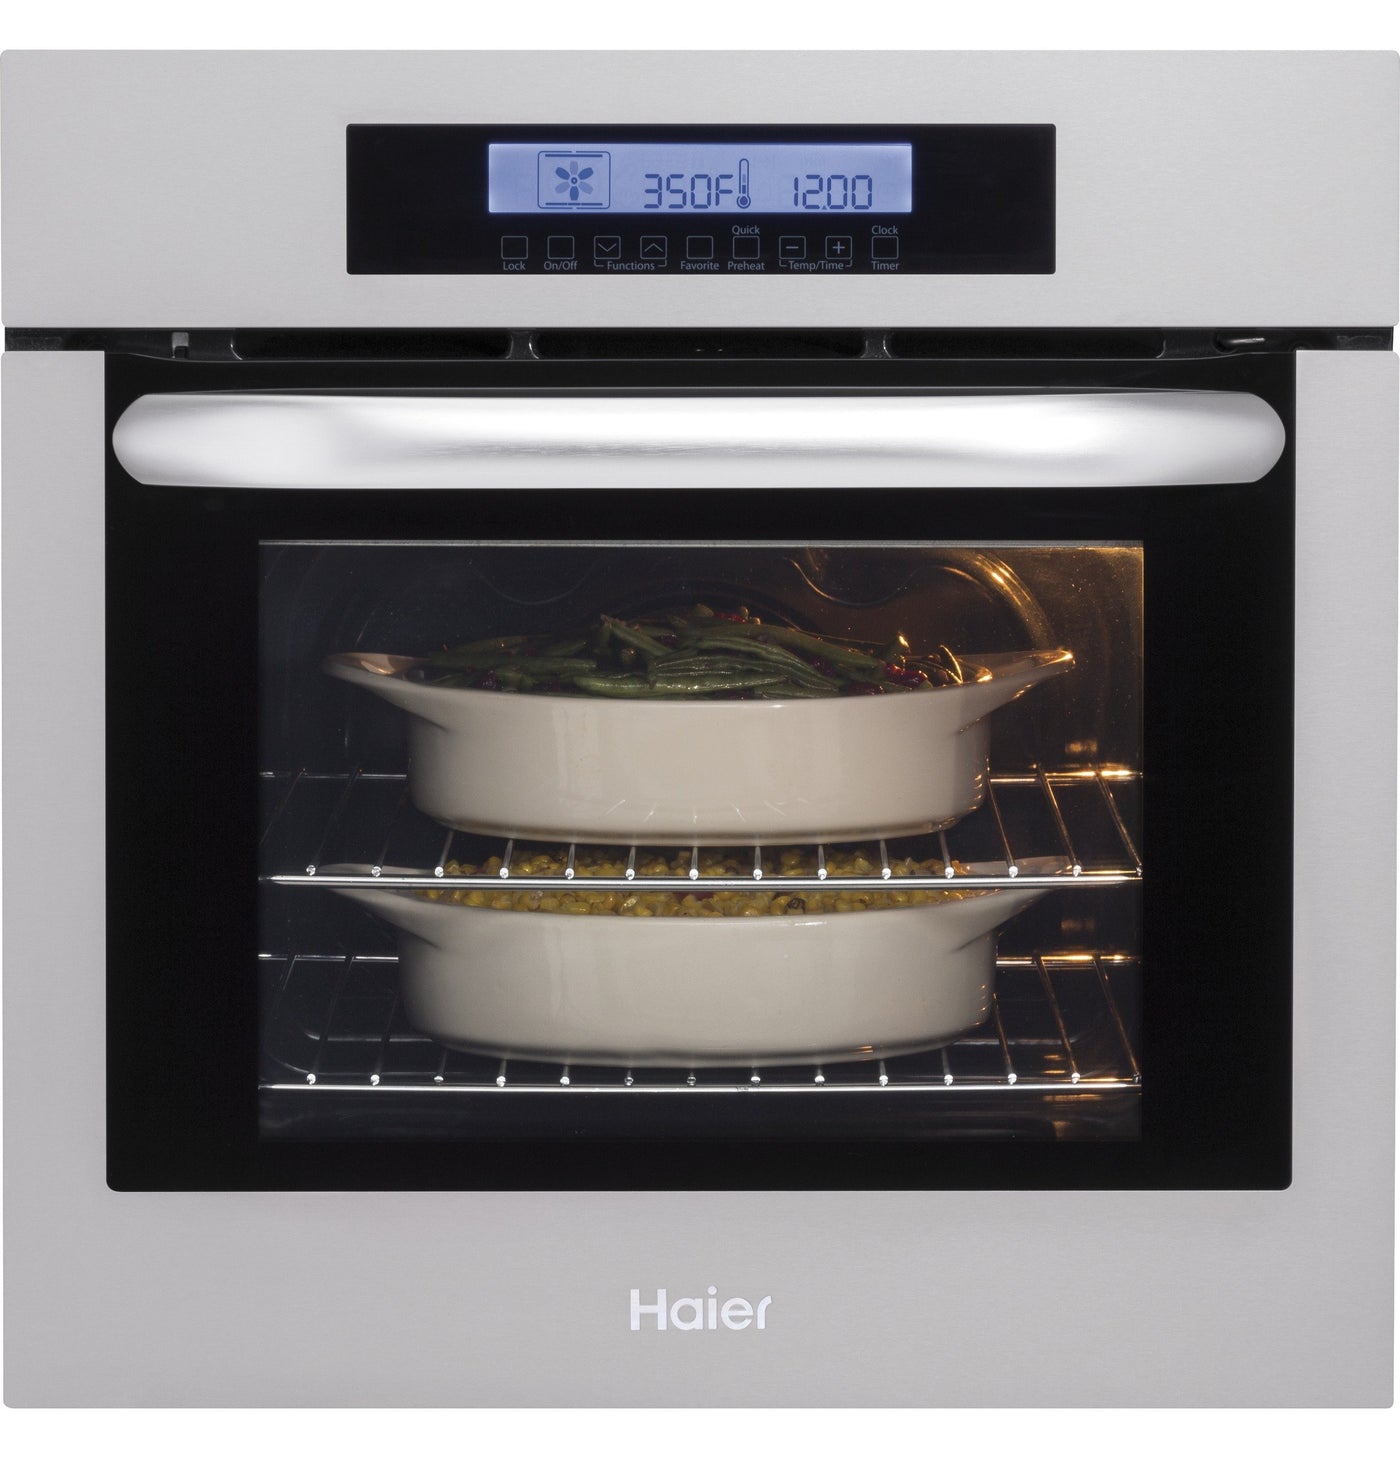 Haier Stainless Steel 24" Convection Wall Oven - HCW2360AES